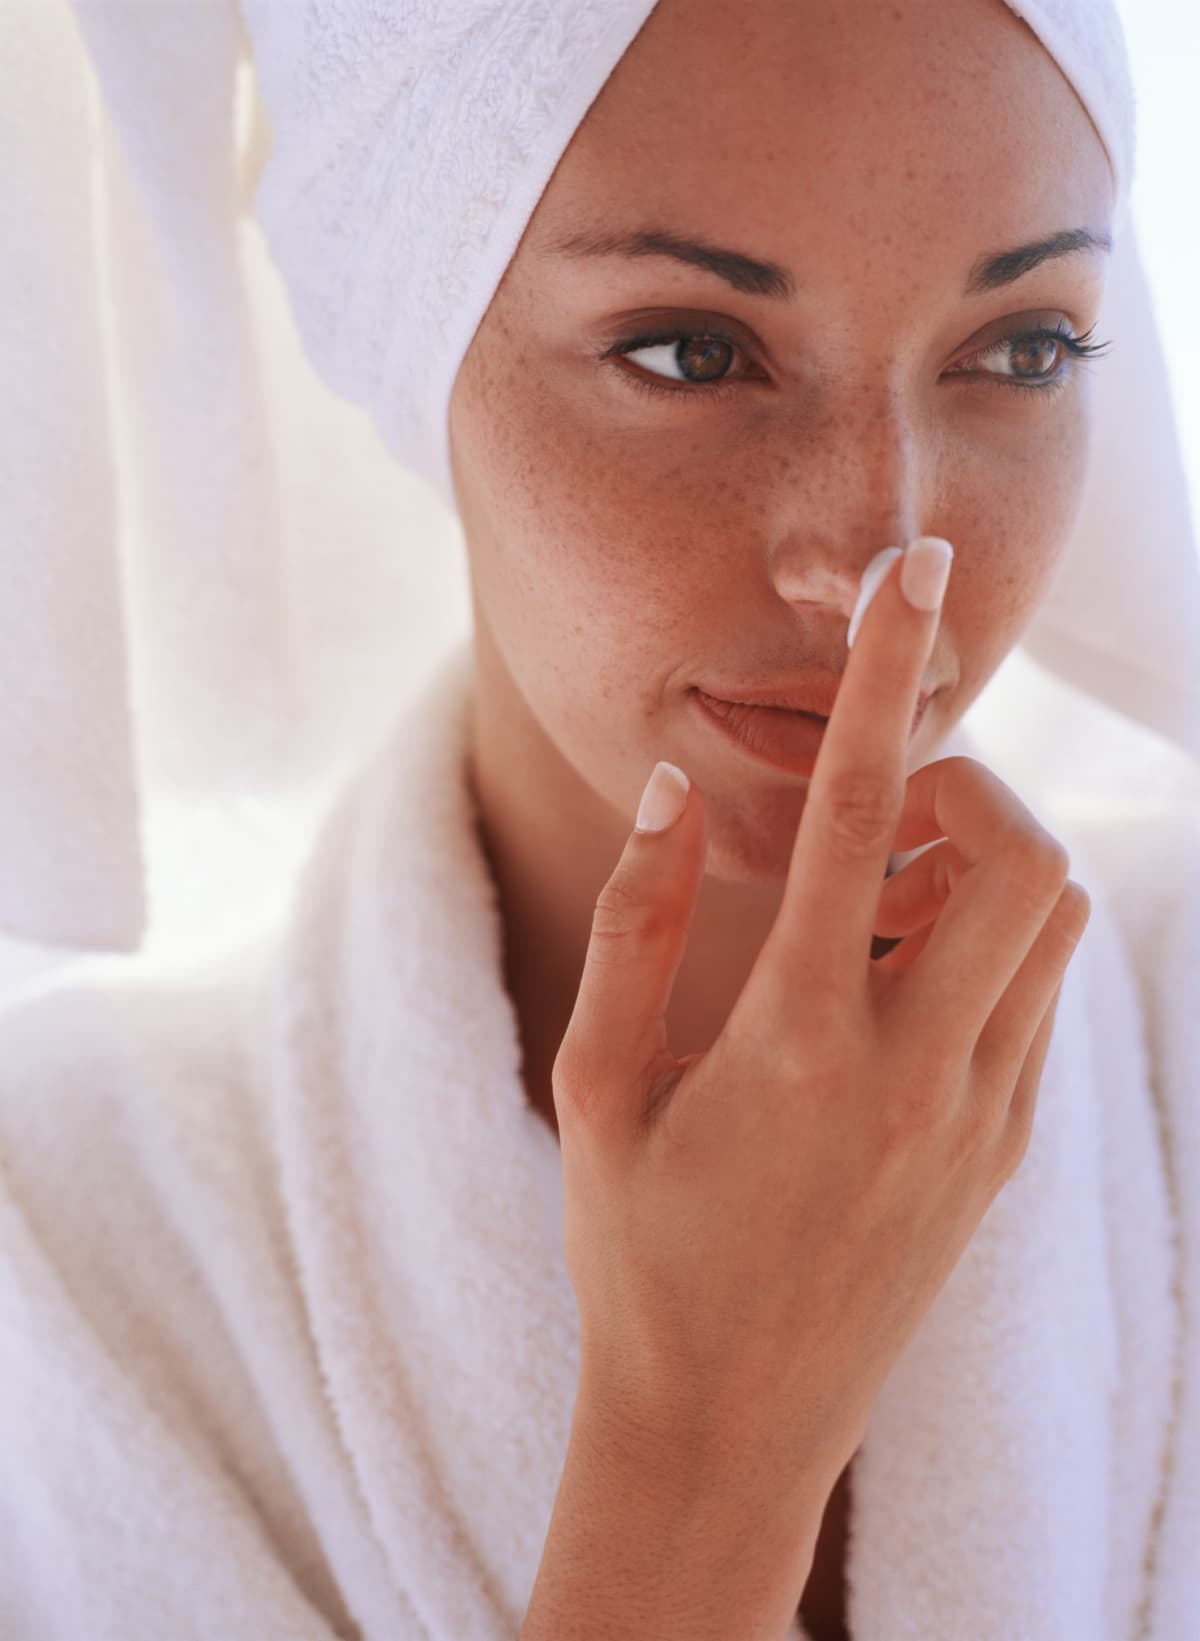 Woman wearing a bathrobe and bathtowel wrapped around her head applies moisturizer to her nose